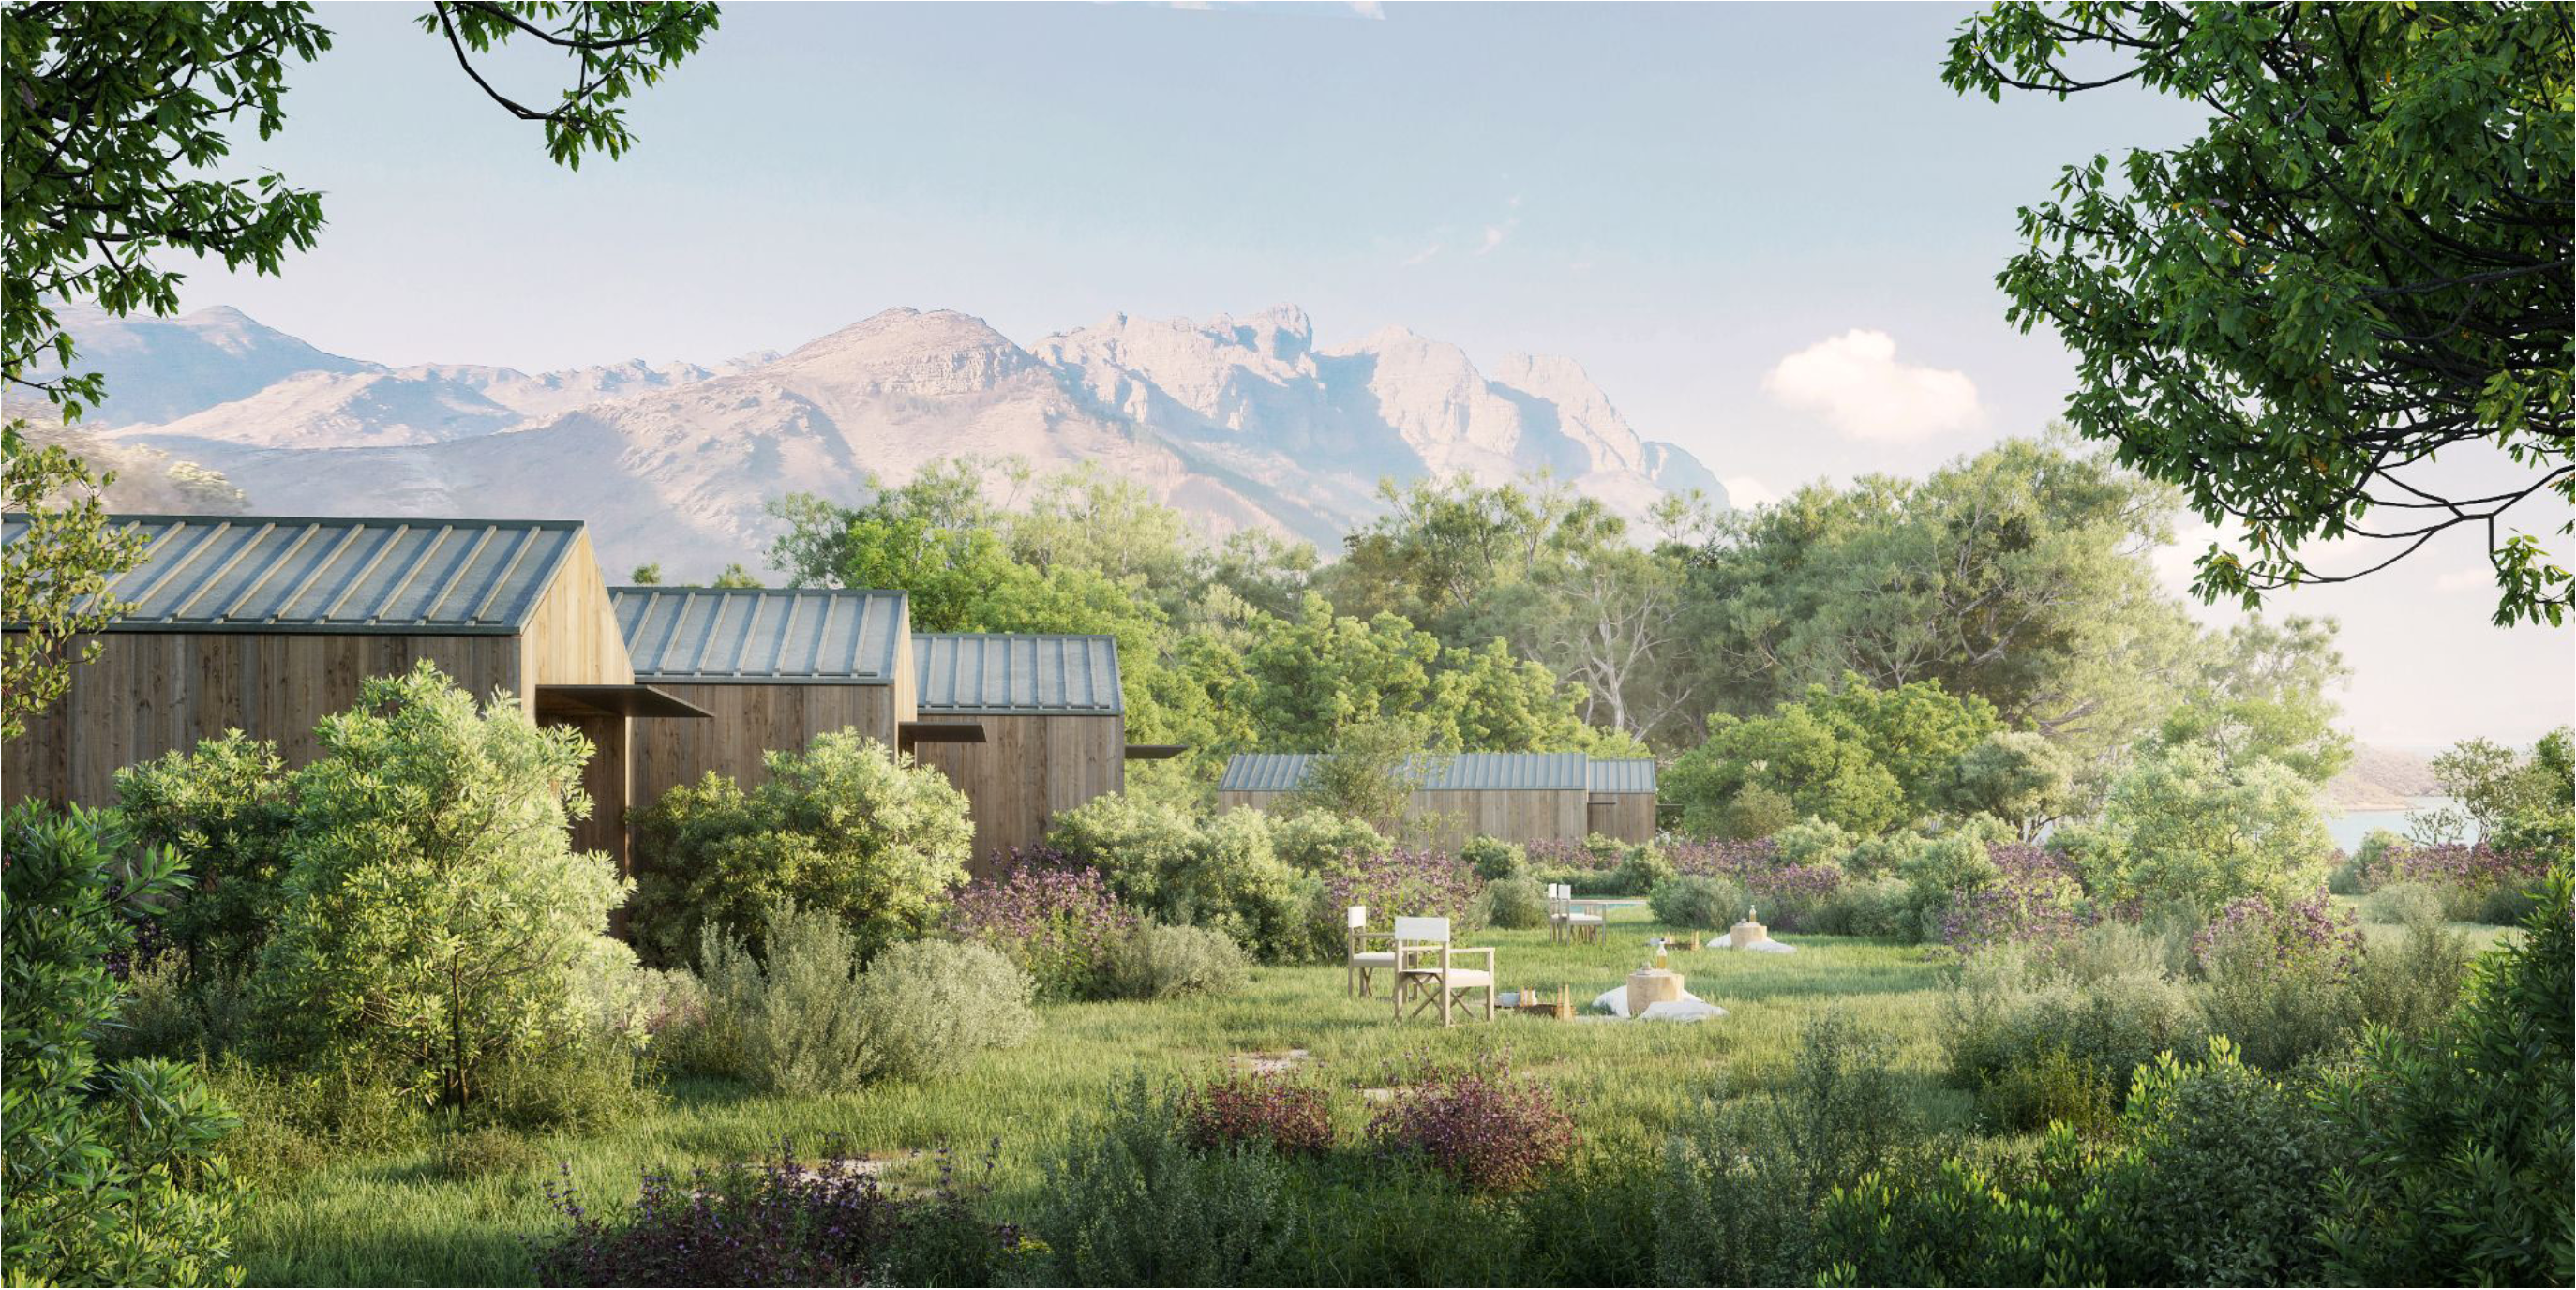 An artistic rendering of the idyllic outdoor space at The Farm Carpinteria.